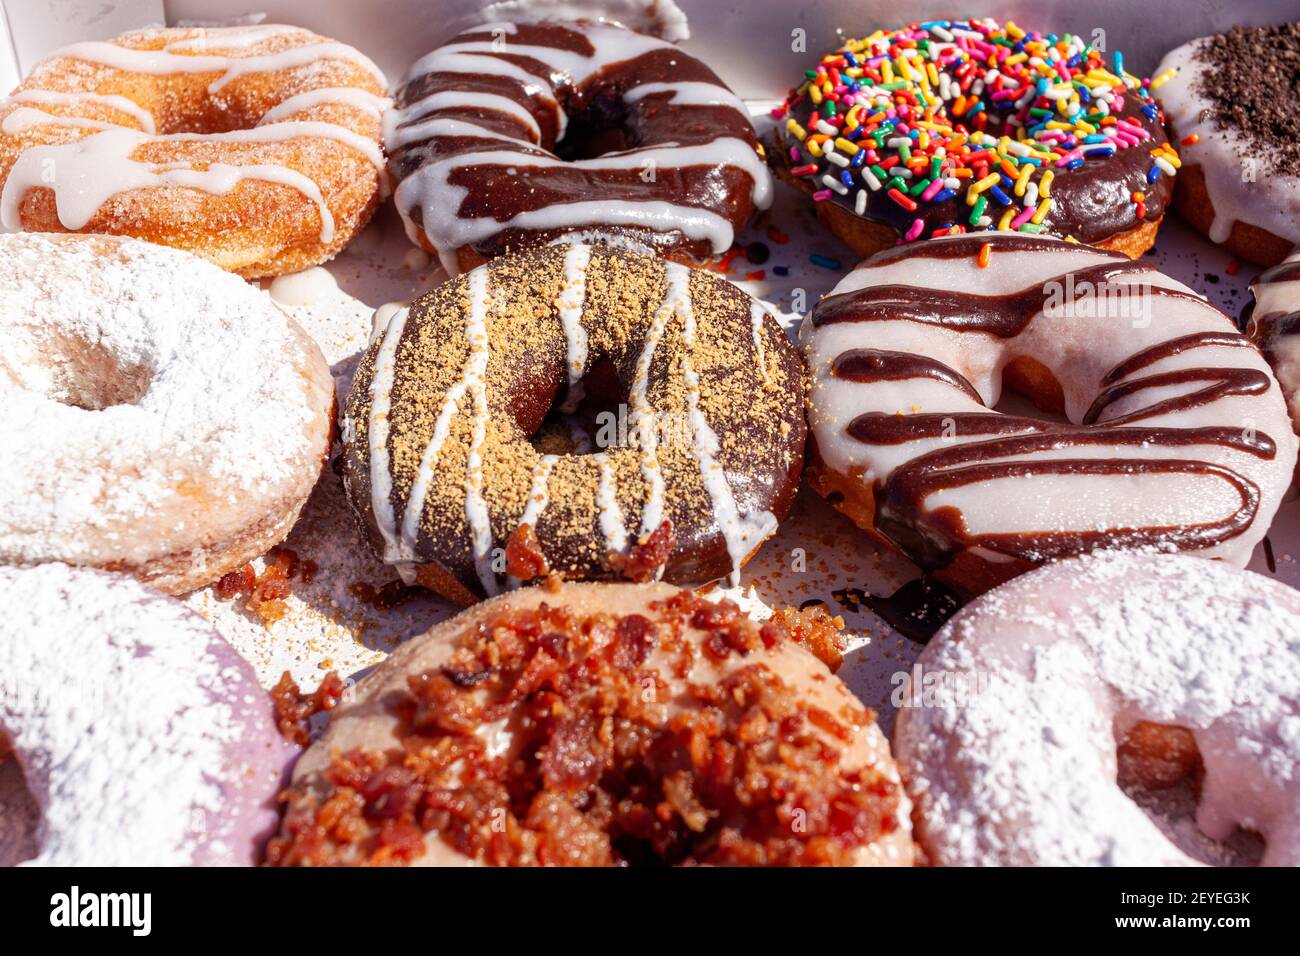 Flat lay image of fresh made store bought donuts in paper box fresh out of the donut shop. An assortment with different flavors and toppings are packe Stock Photo